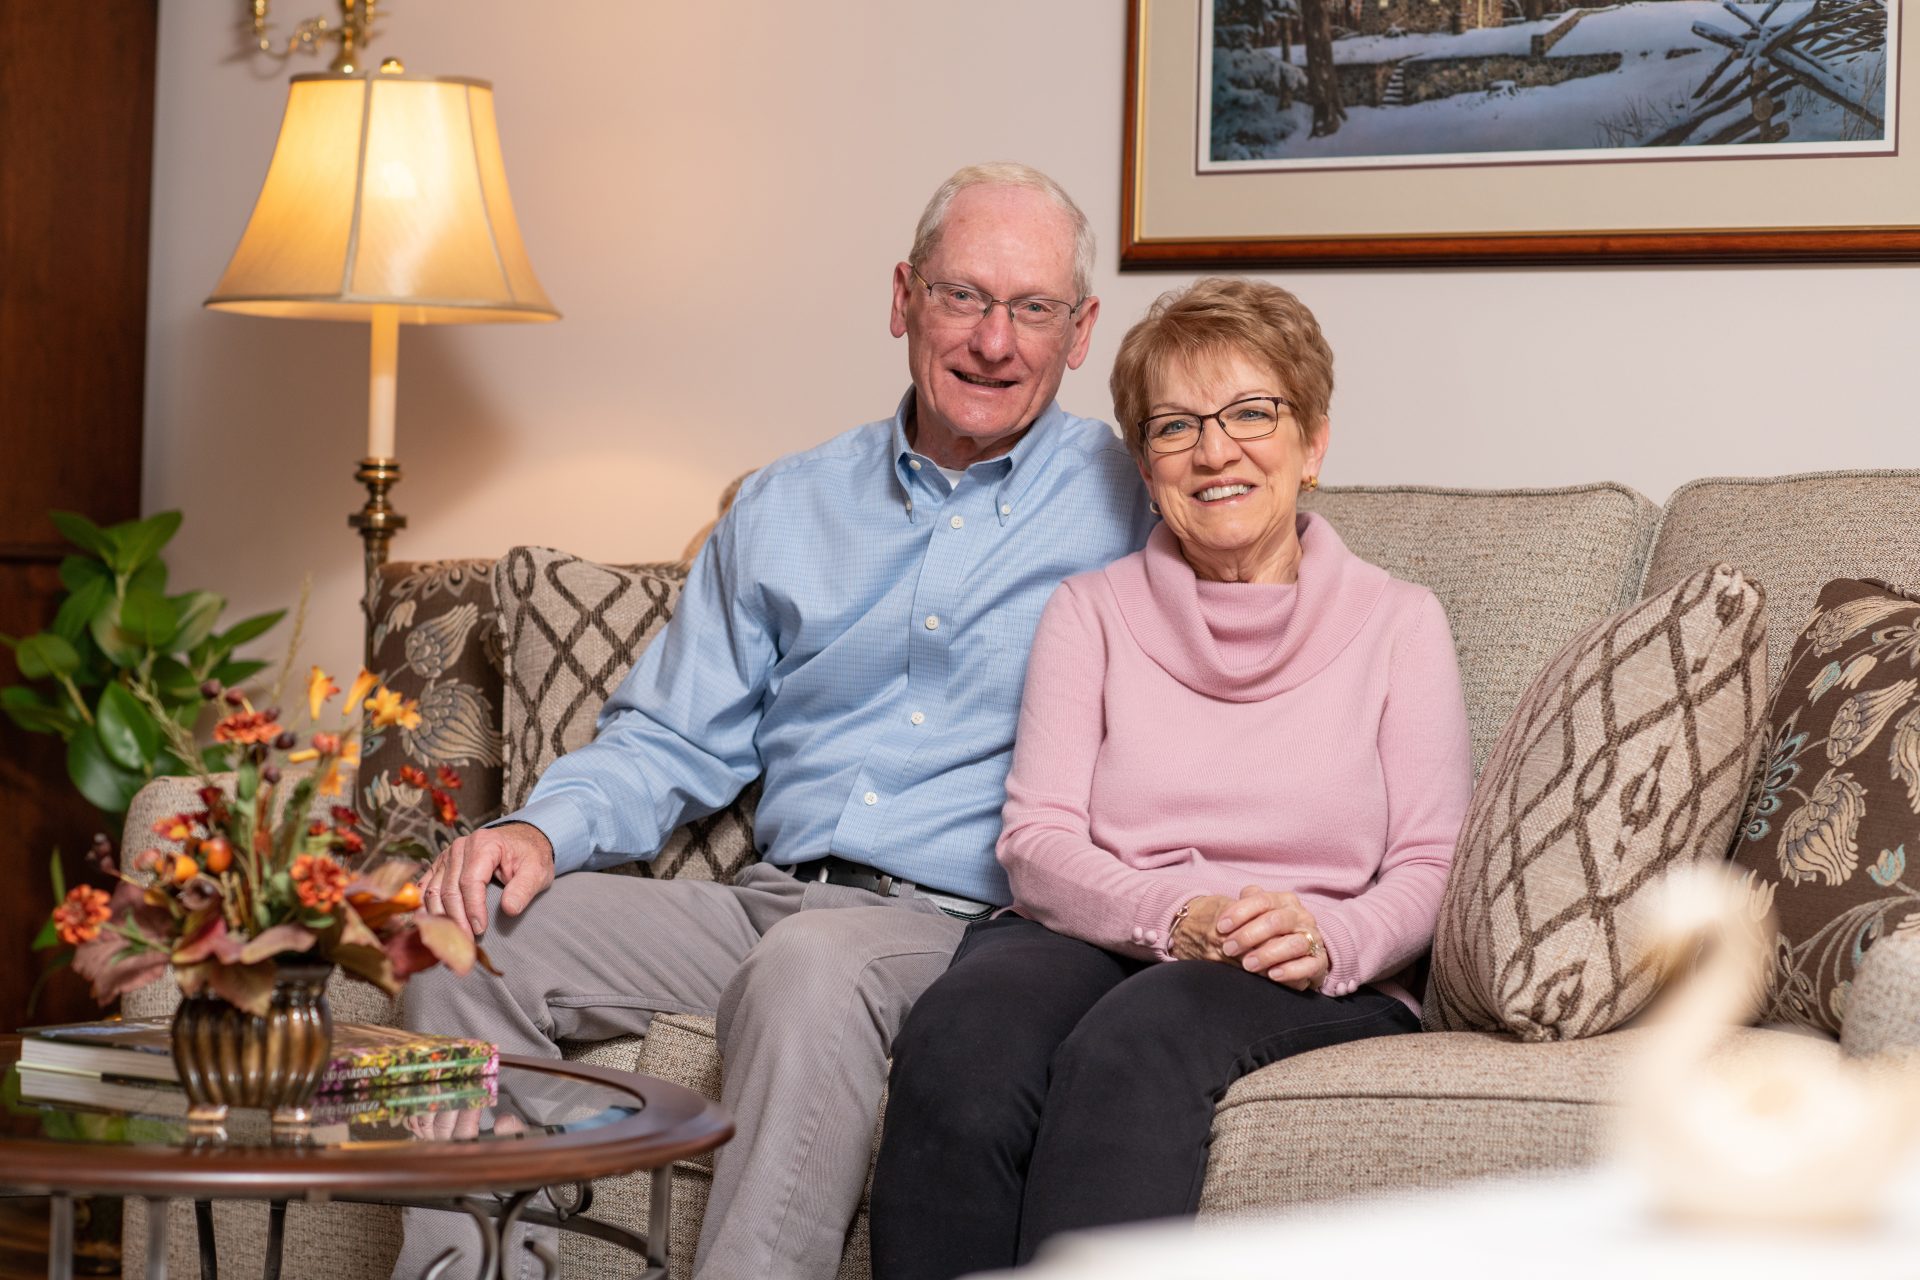 An elderly couple sitting on the couch smiling and looking at camera